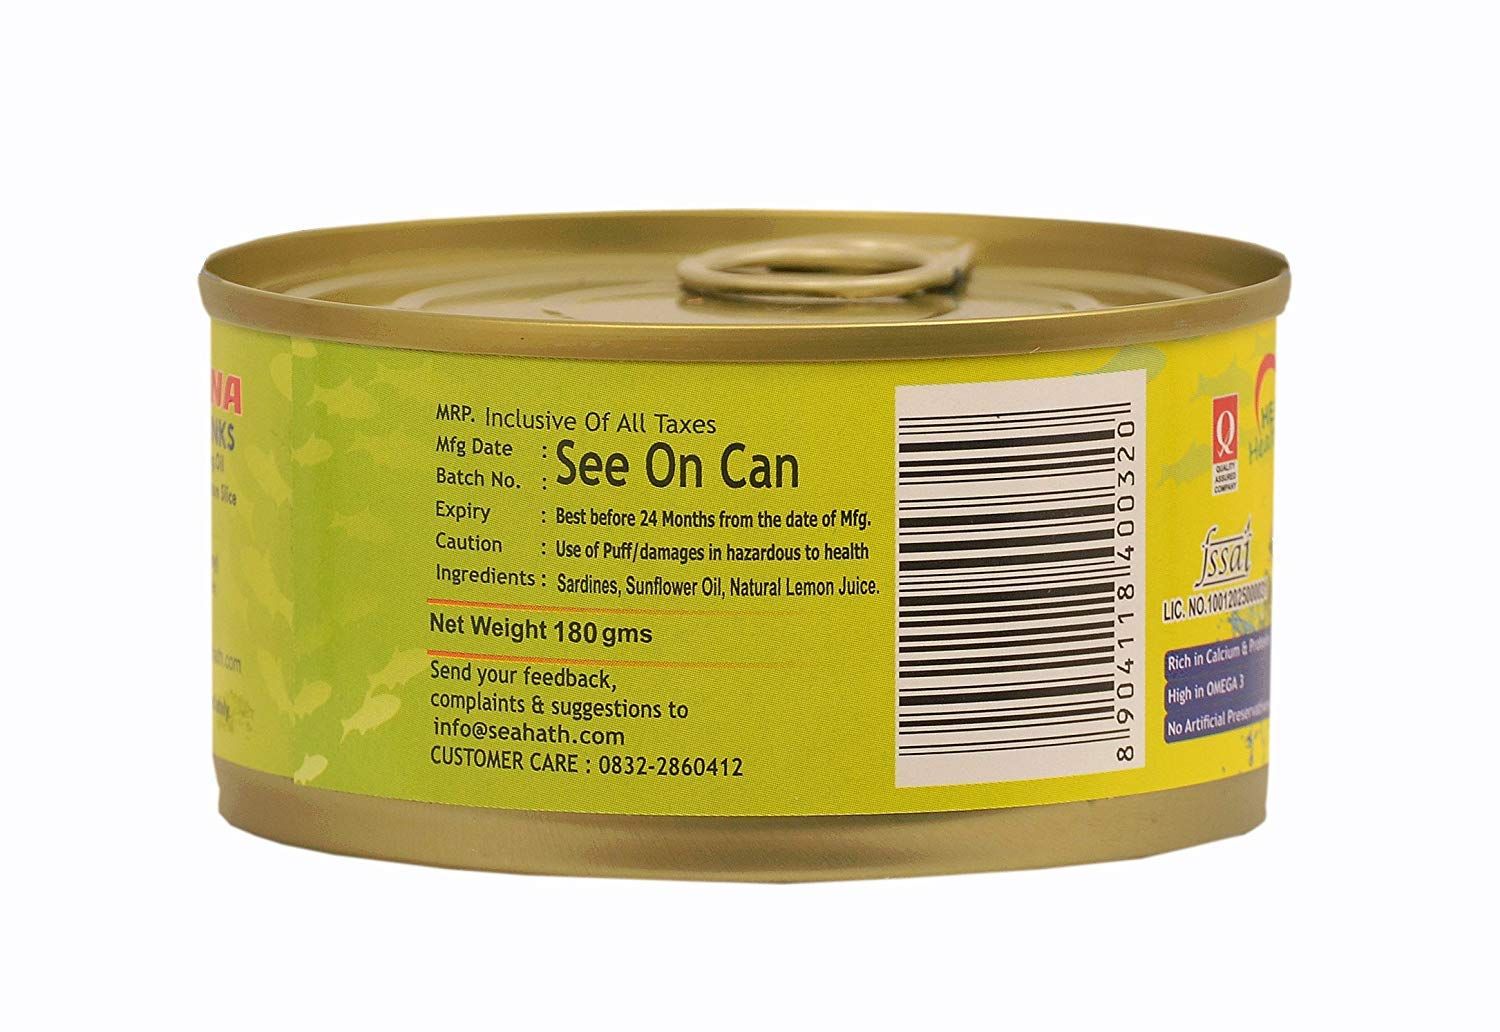 Ocean's Secret Canned Tuna Chunks in Oil with Natural Lemon Juice Image